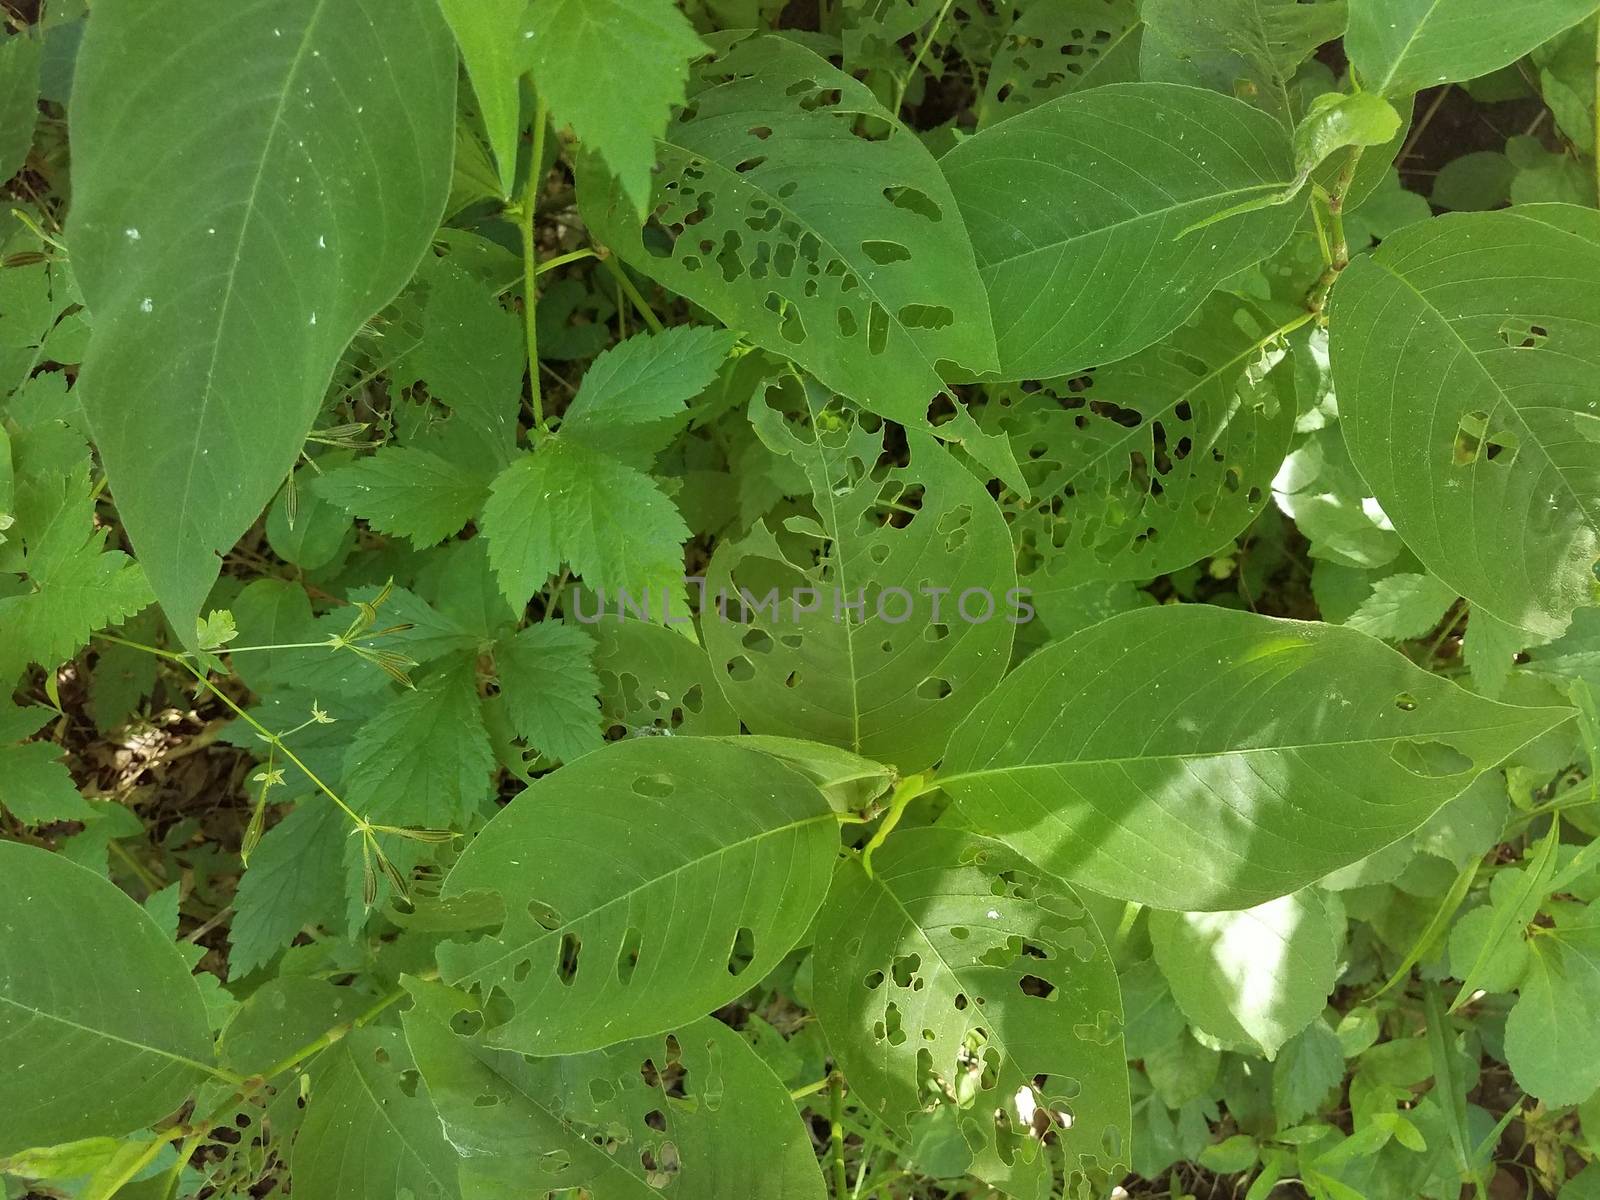 green leaves with holes in them from insects eating